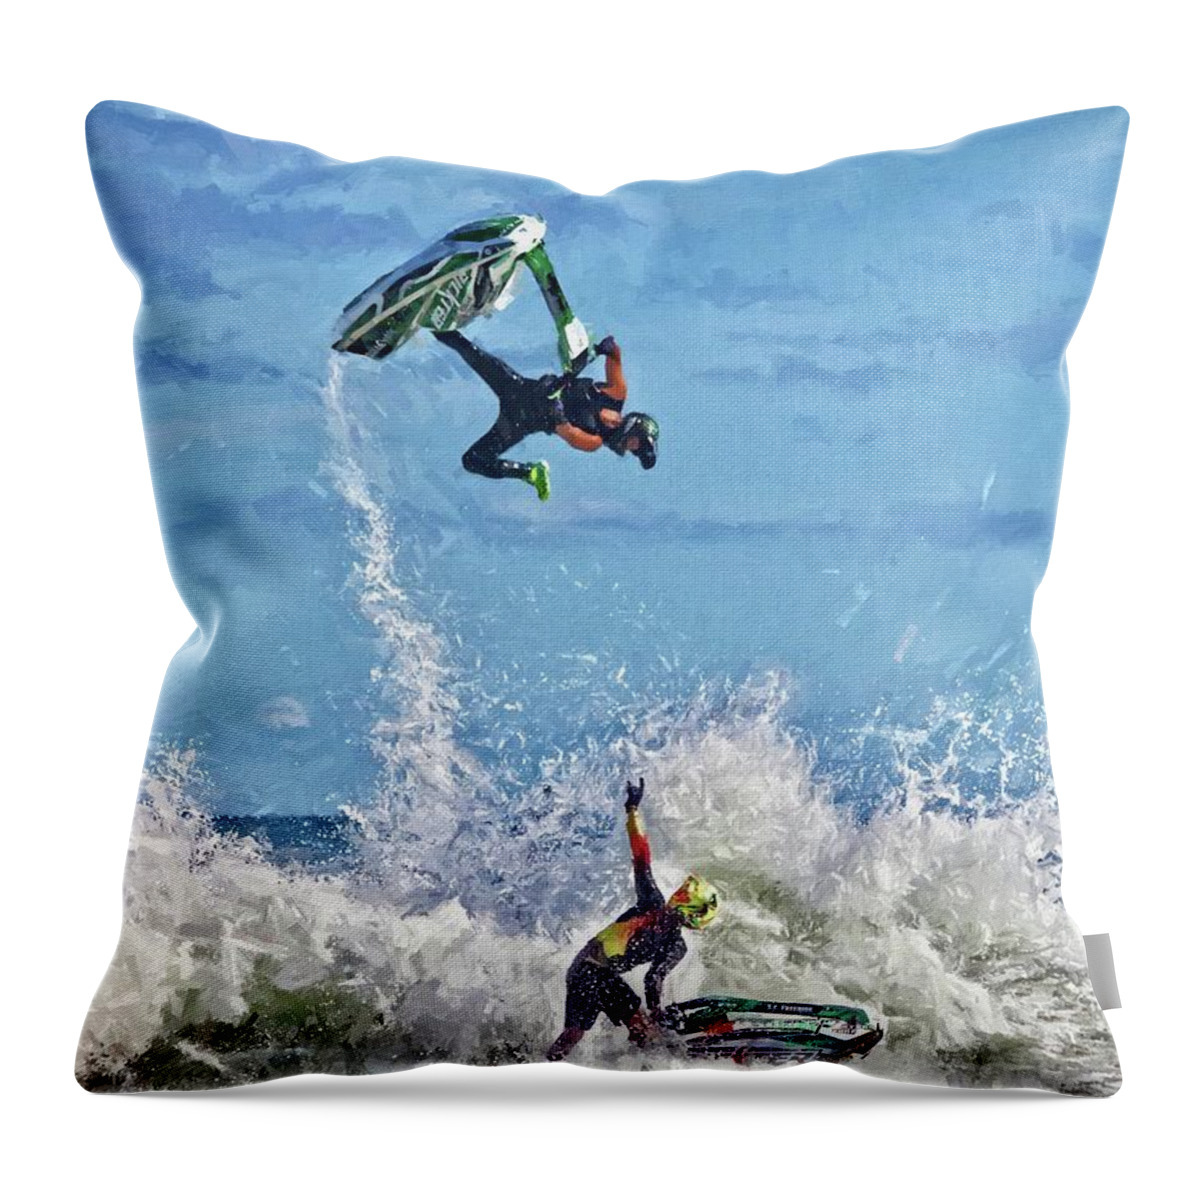 Alicegipsonphotographs Throw Pillow featuring the photograph Gotcha #3 by Alice Gipson